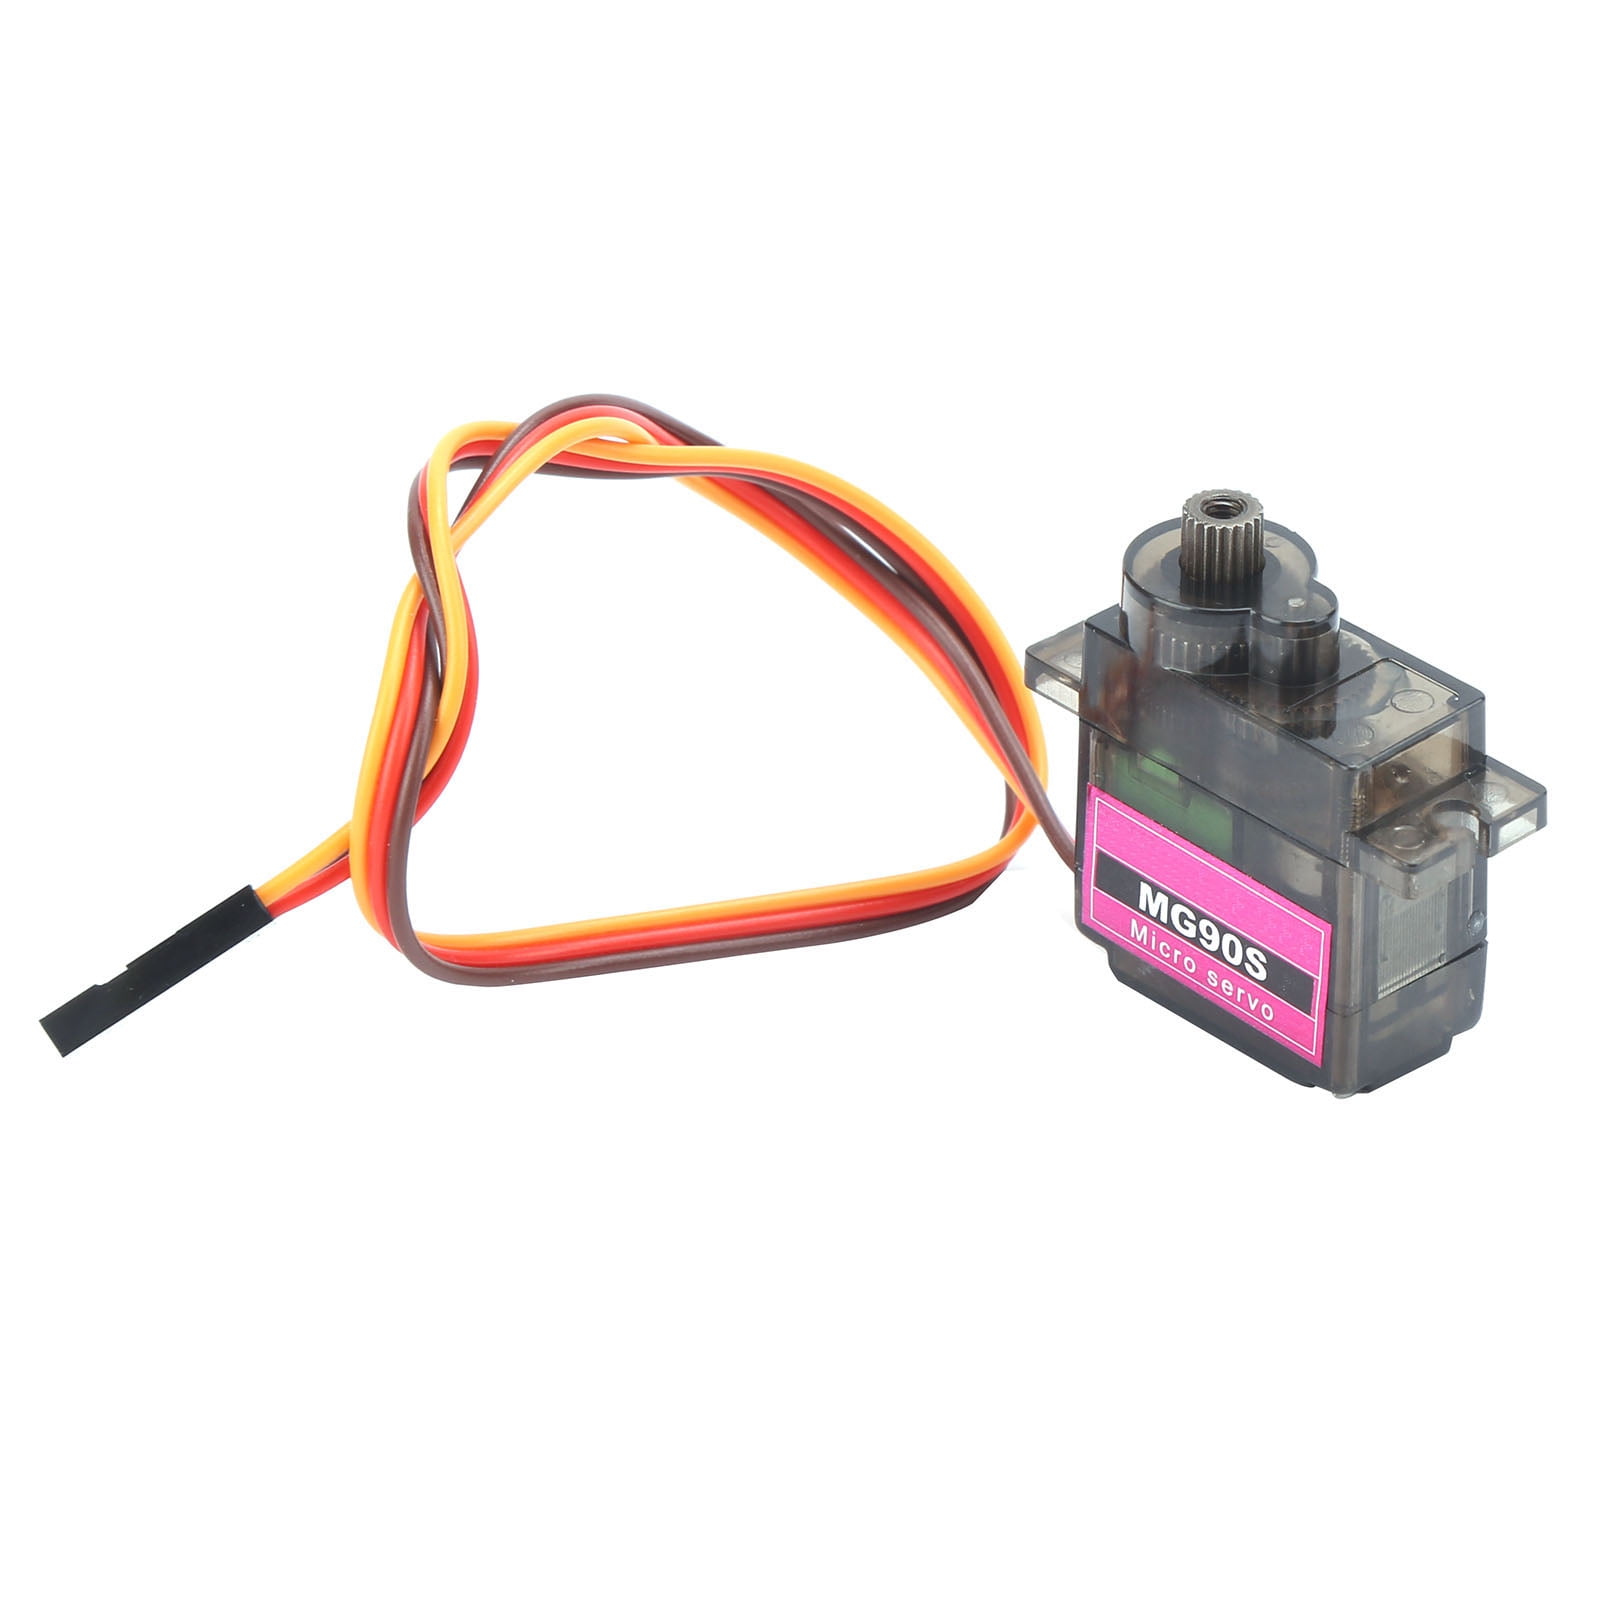 K-power M0261 2.9kg/0.07S Metal Gear Micro Servo for RC Airplane Helicopter Car